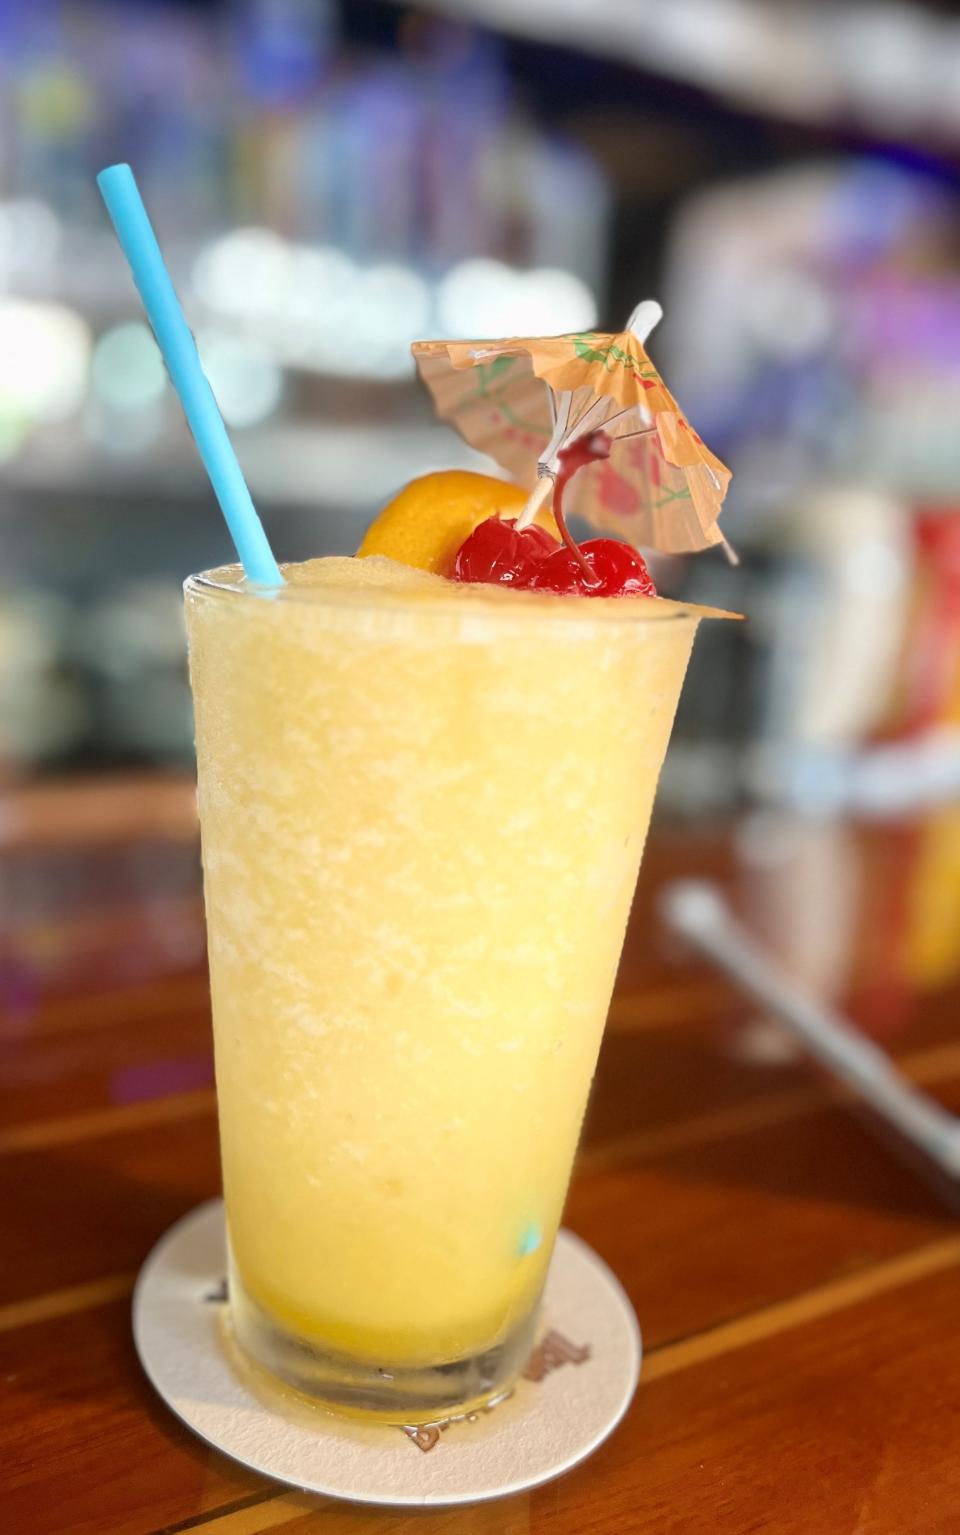 Yucatan Beach Stand on Fort Myers Beach offers this Frozen Spiced Mango Meltdown.